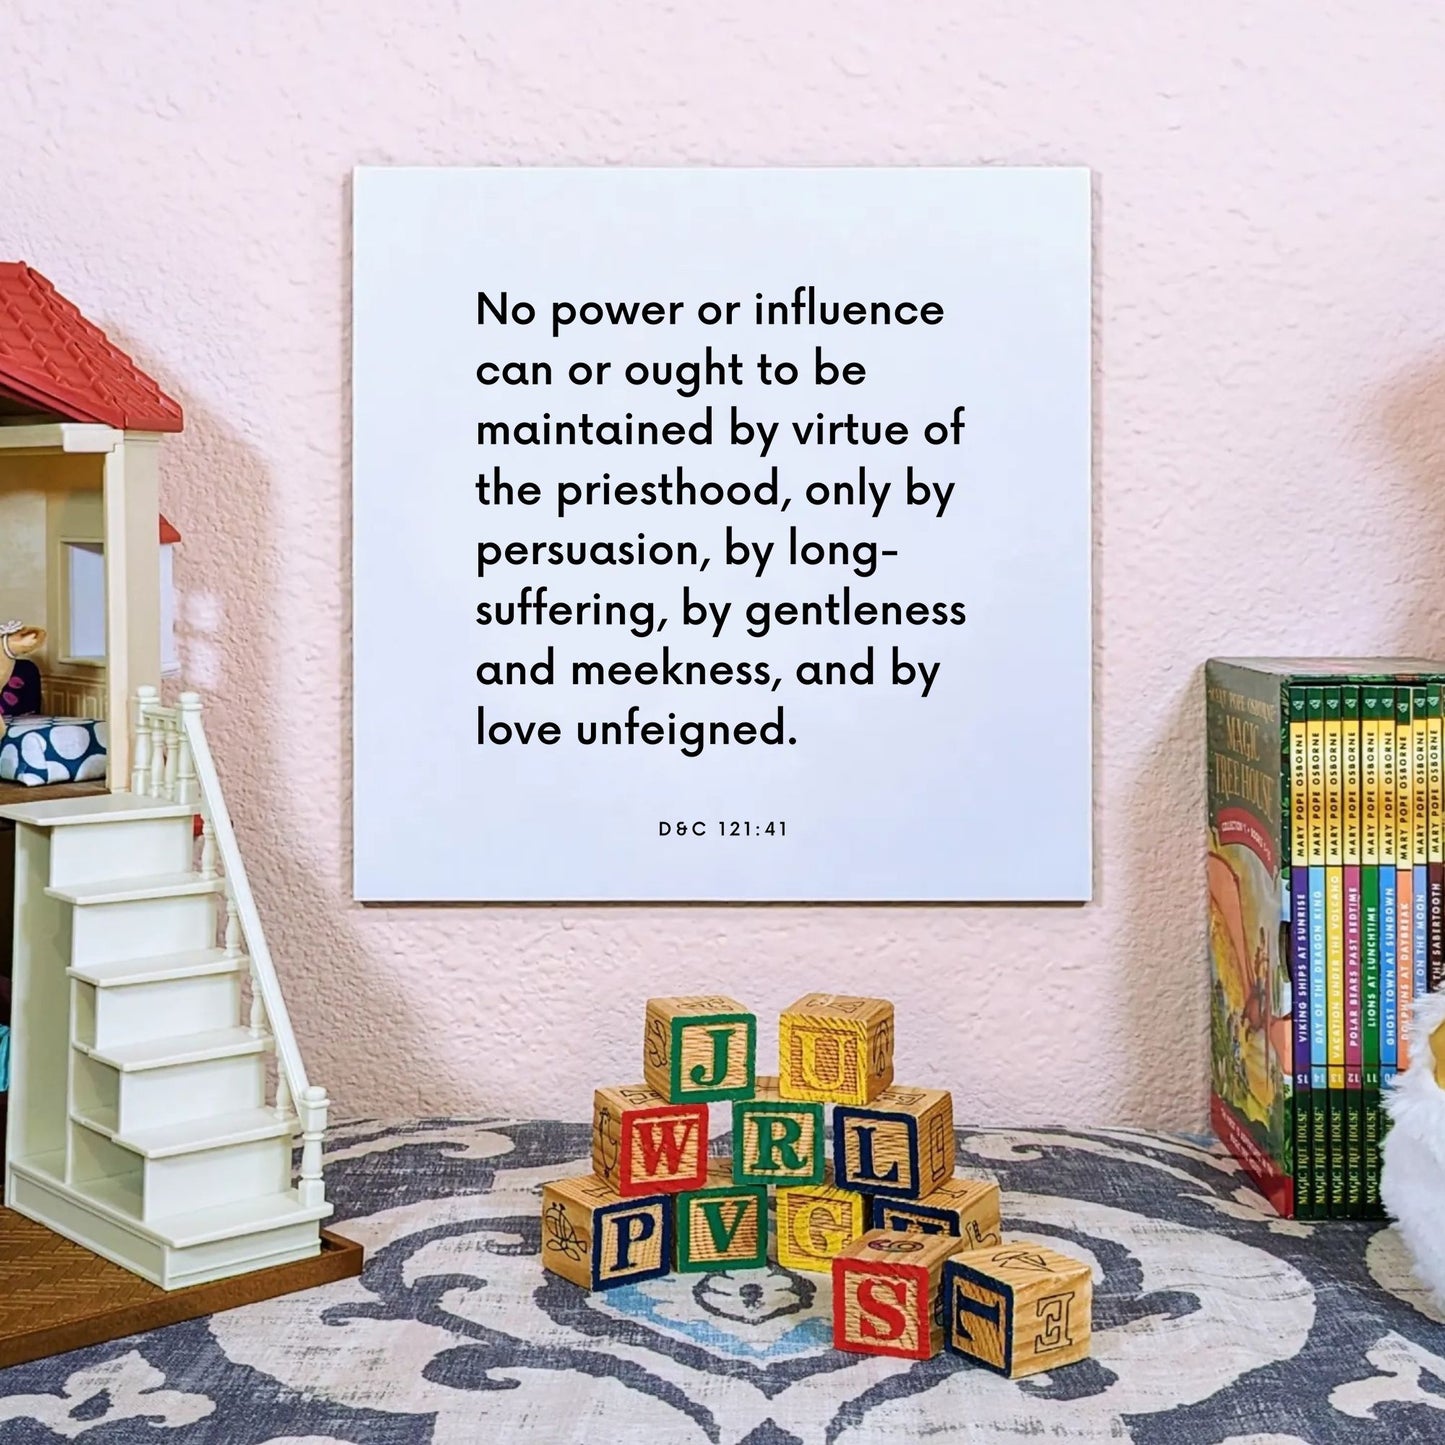 Playroom mouting of the scripture tile for D&C 121:41 - "No power or influence can or ought to be maintained"